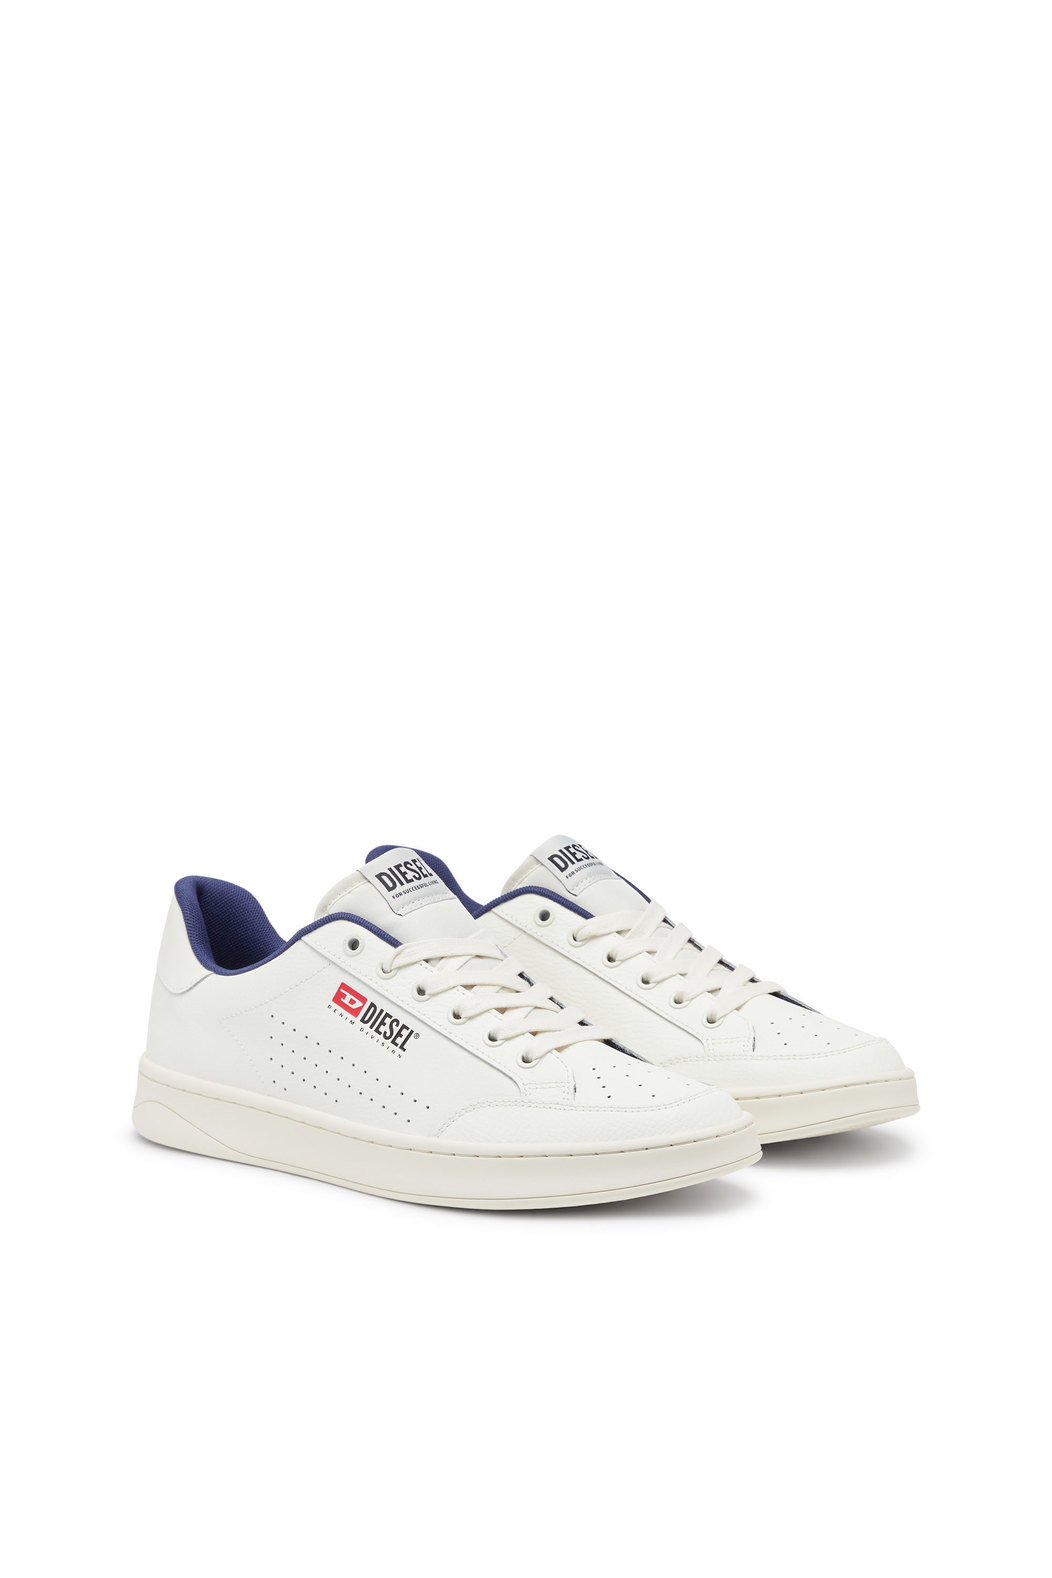 S-Athene Vtg - Retro sneakers in perforated leather